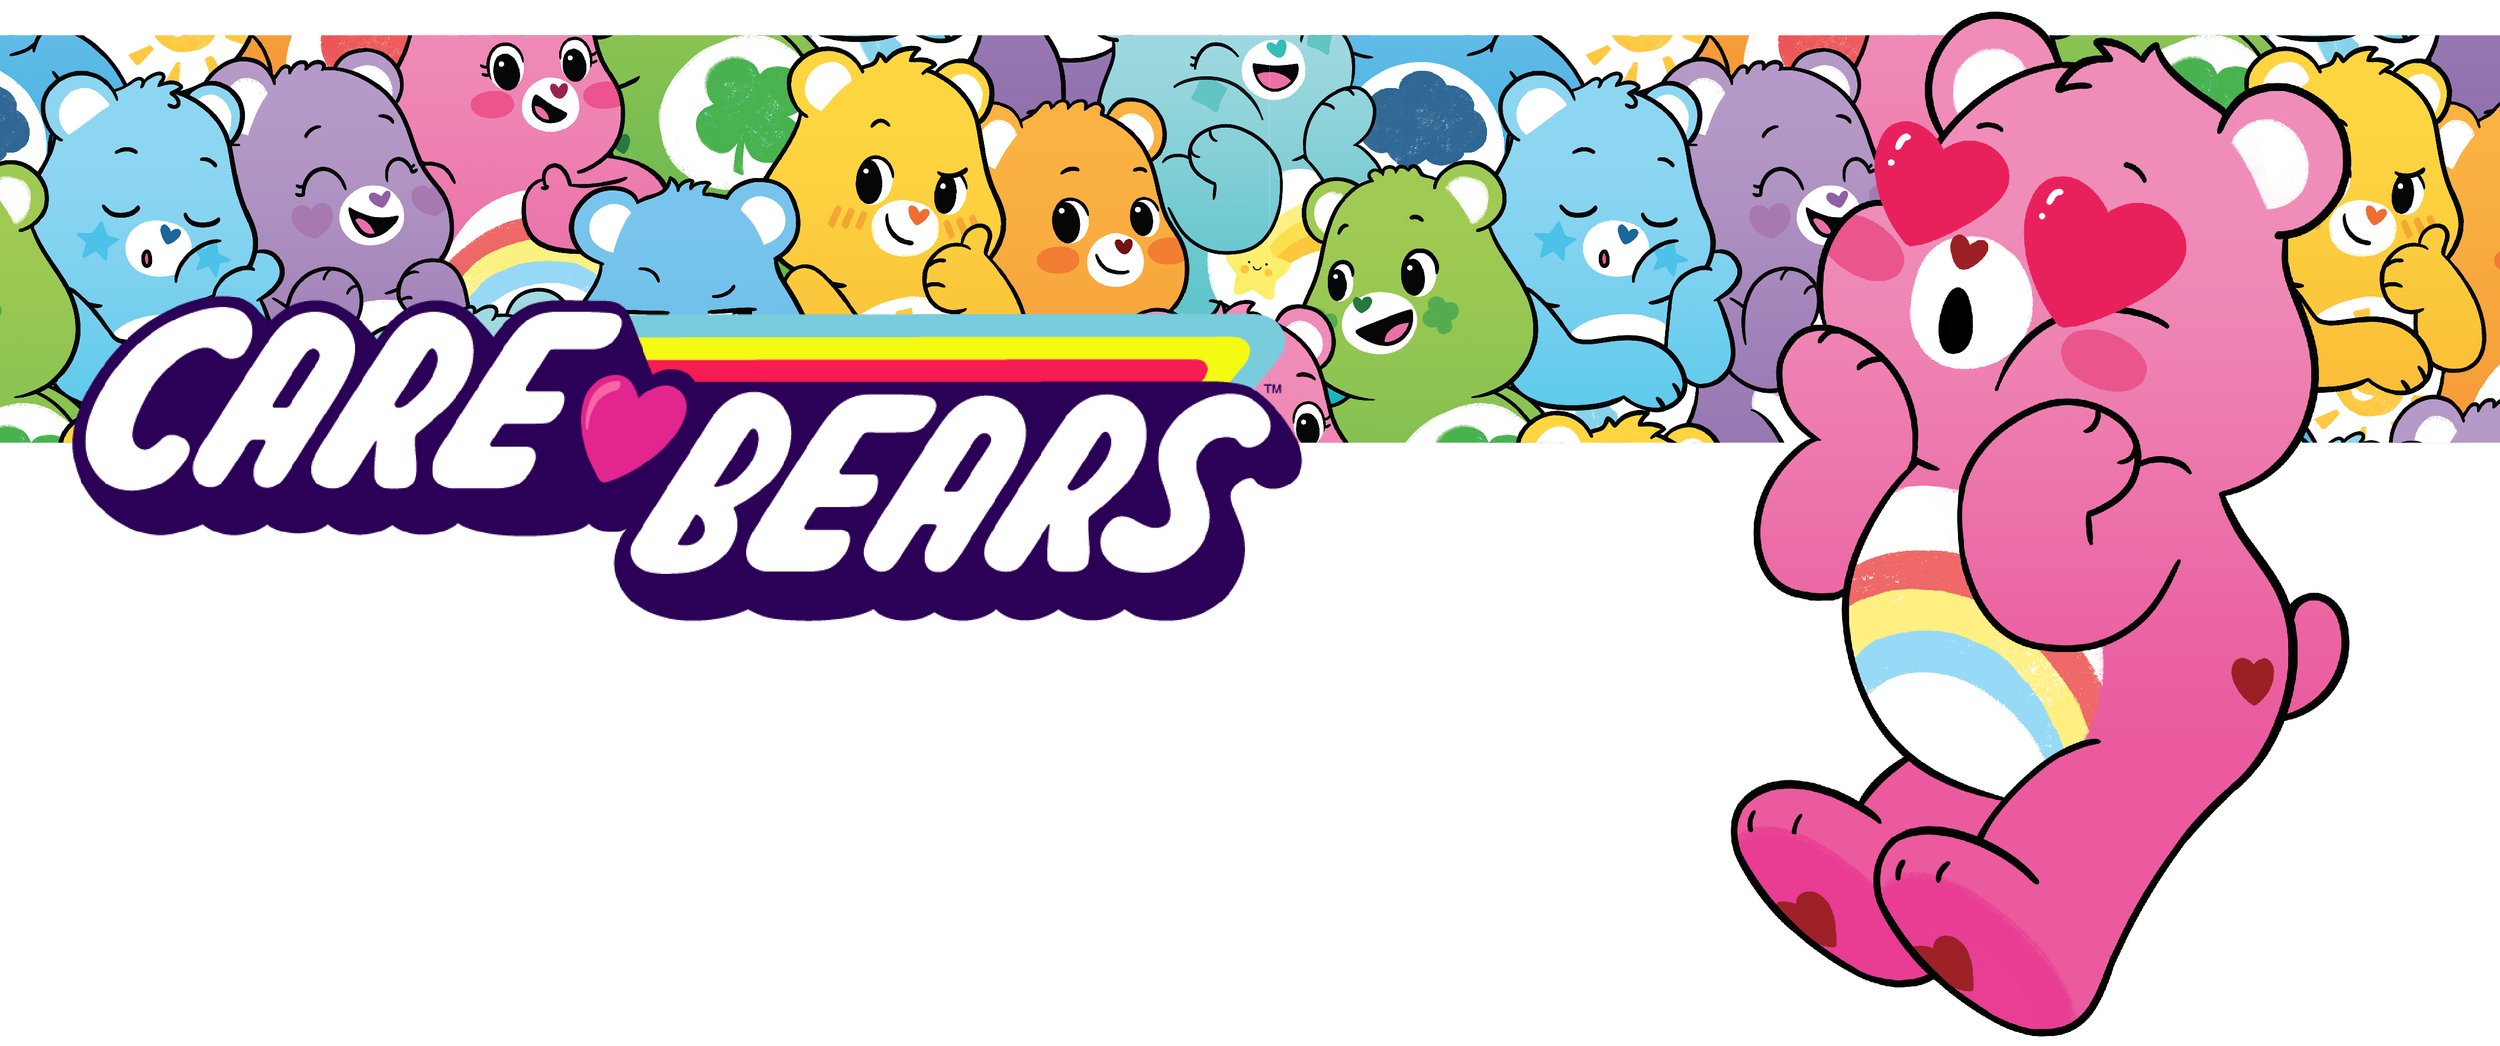 Care Bears, Kangaru Toys, Stationery, Scented markers, stickers